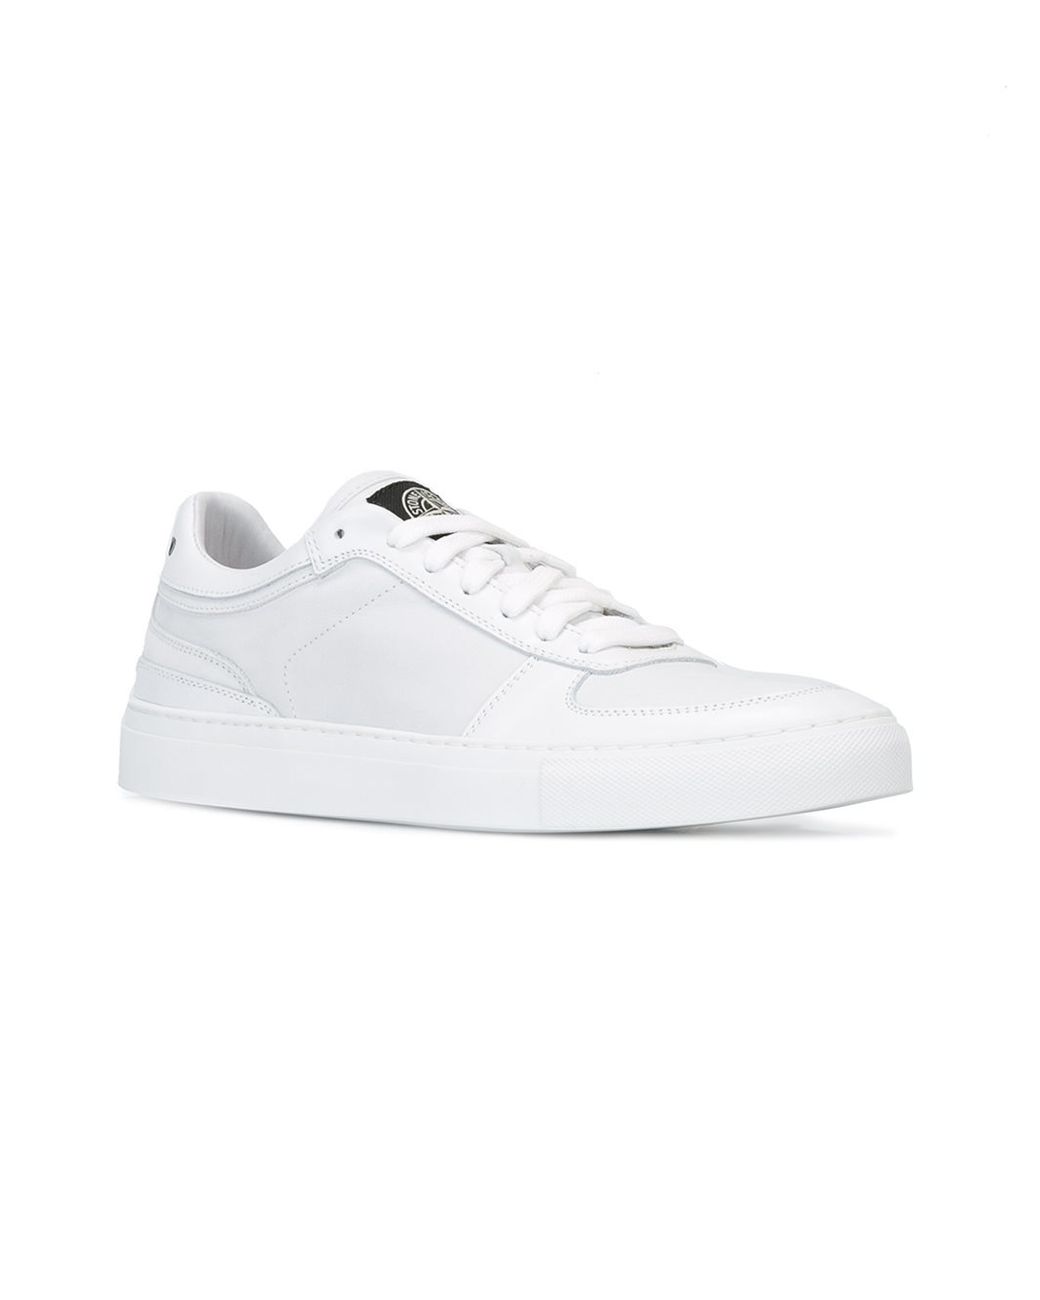 Stone Island Leather X Diemme Sneakers in White for Men | Lyst